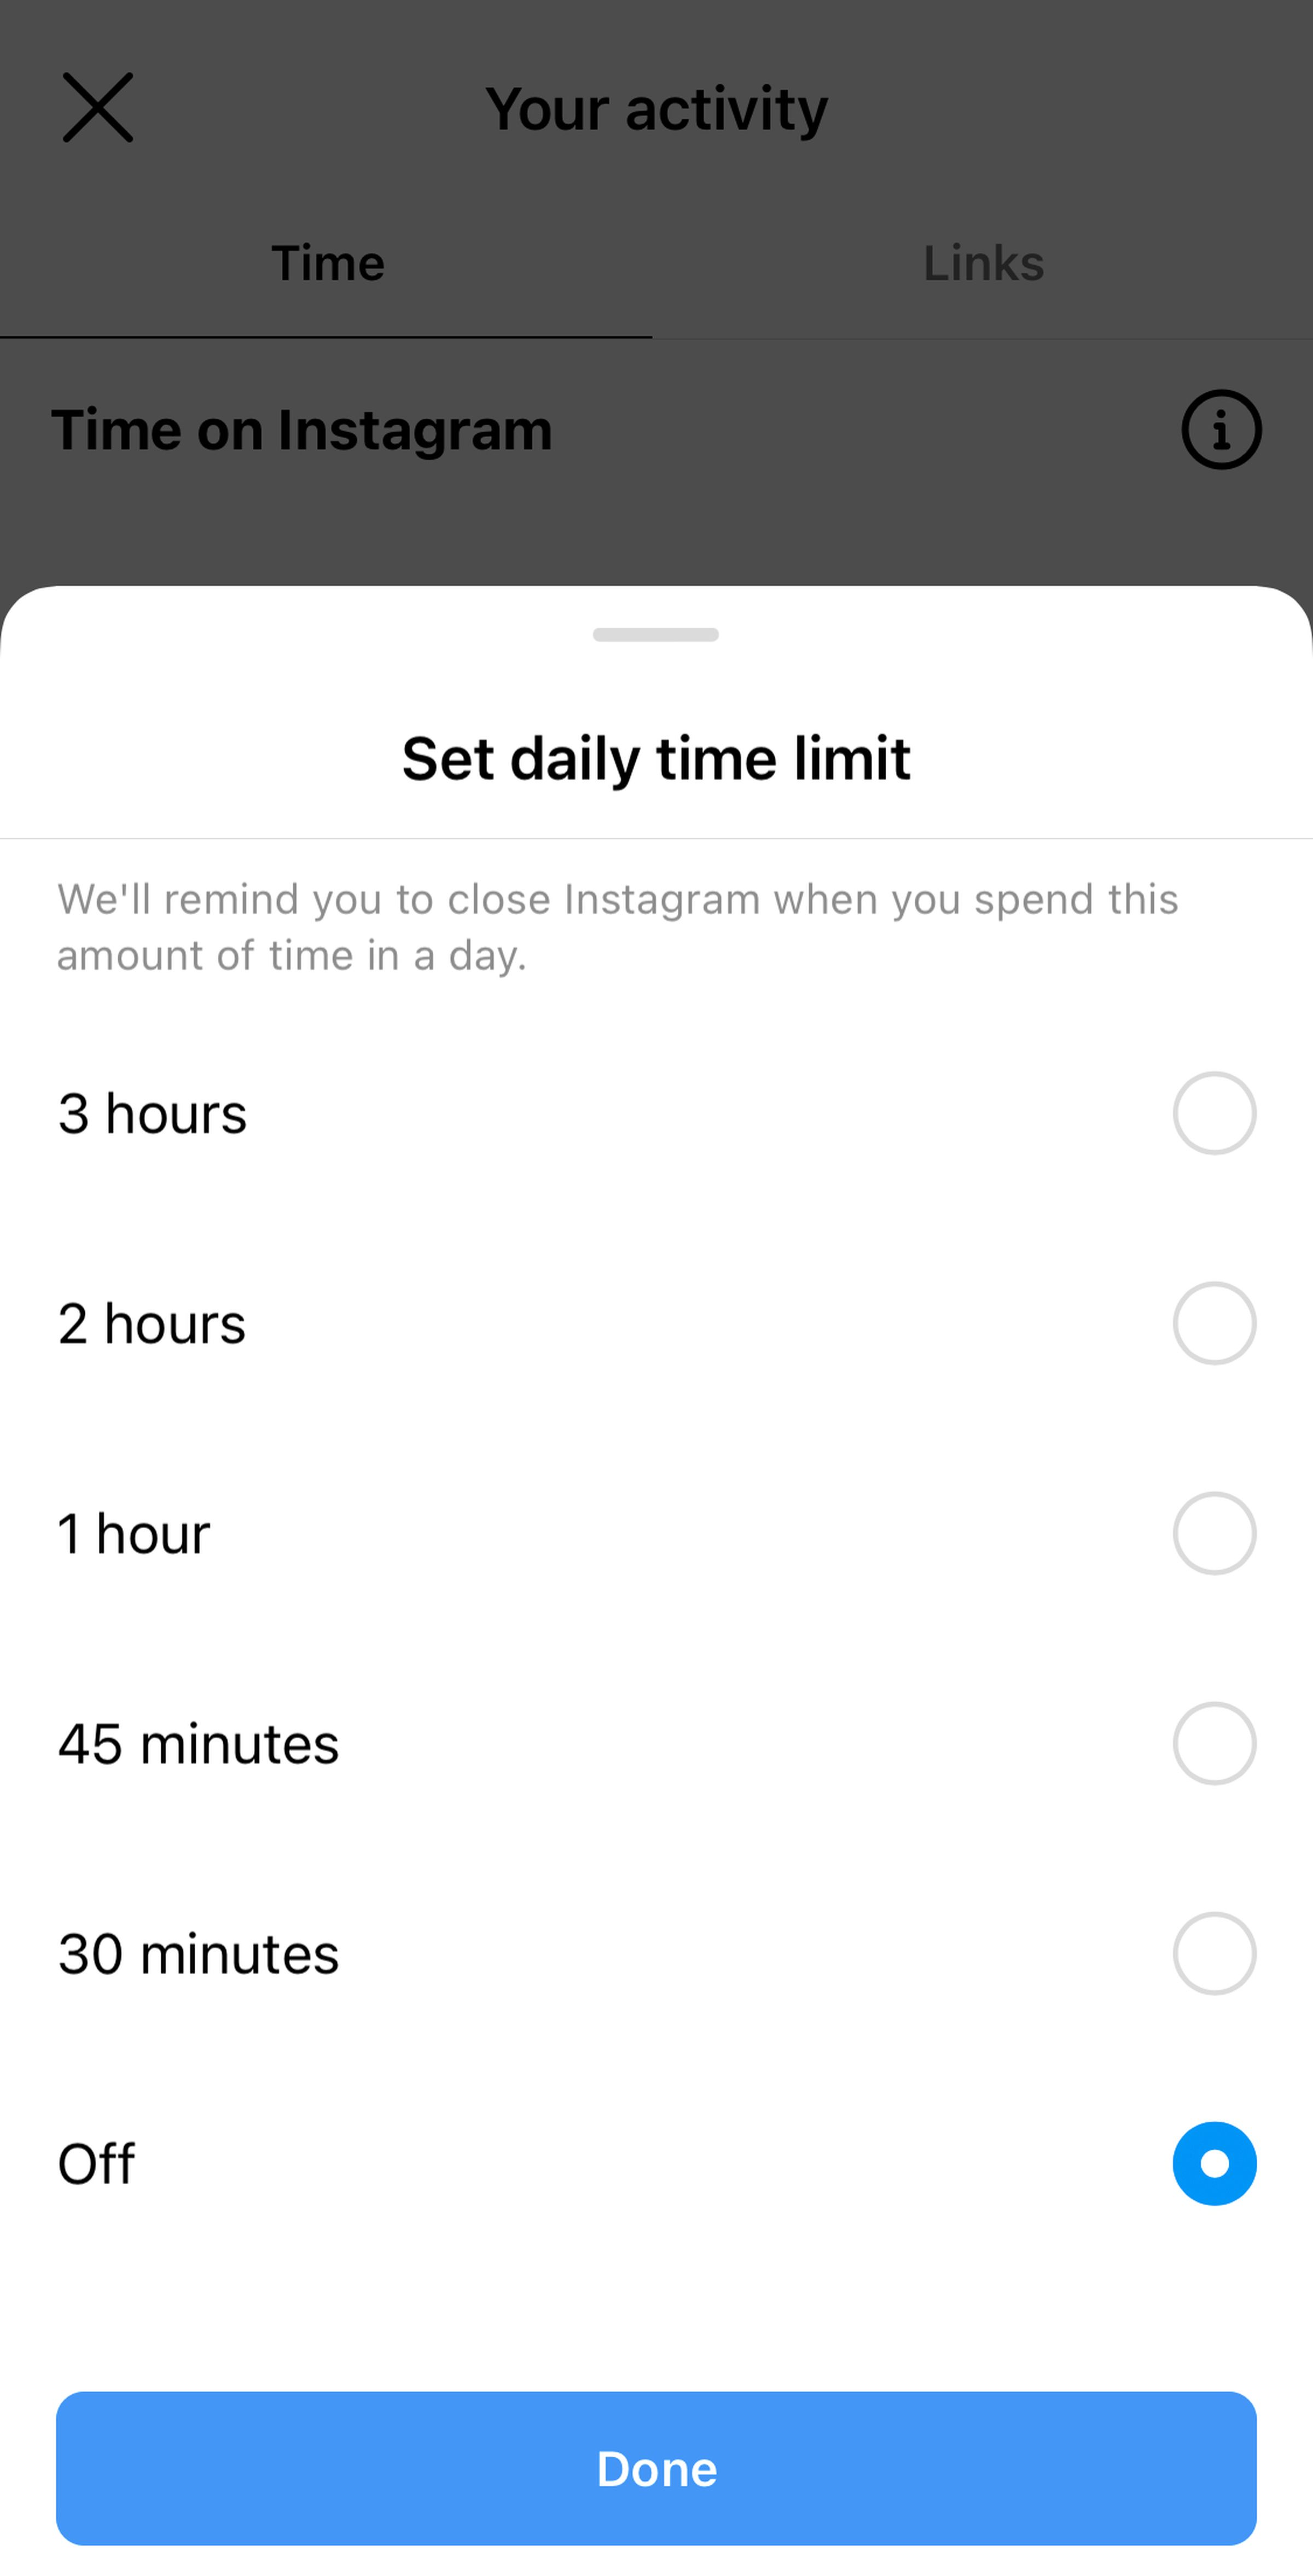 A screenshot taken from the Instagram app showing the current options for daily time limits